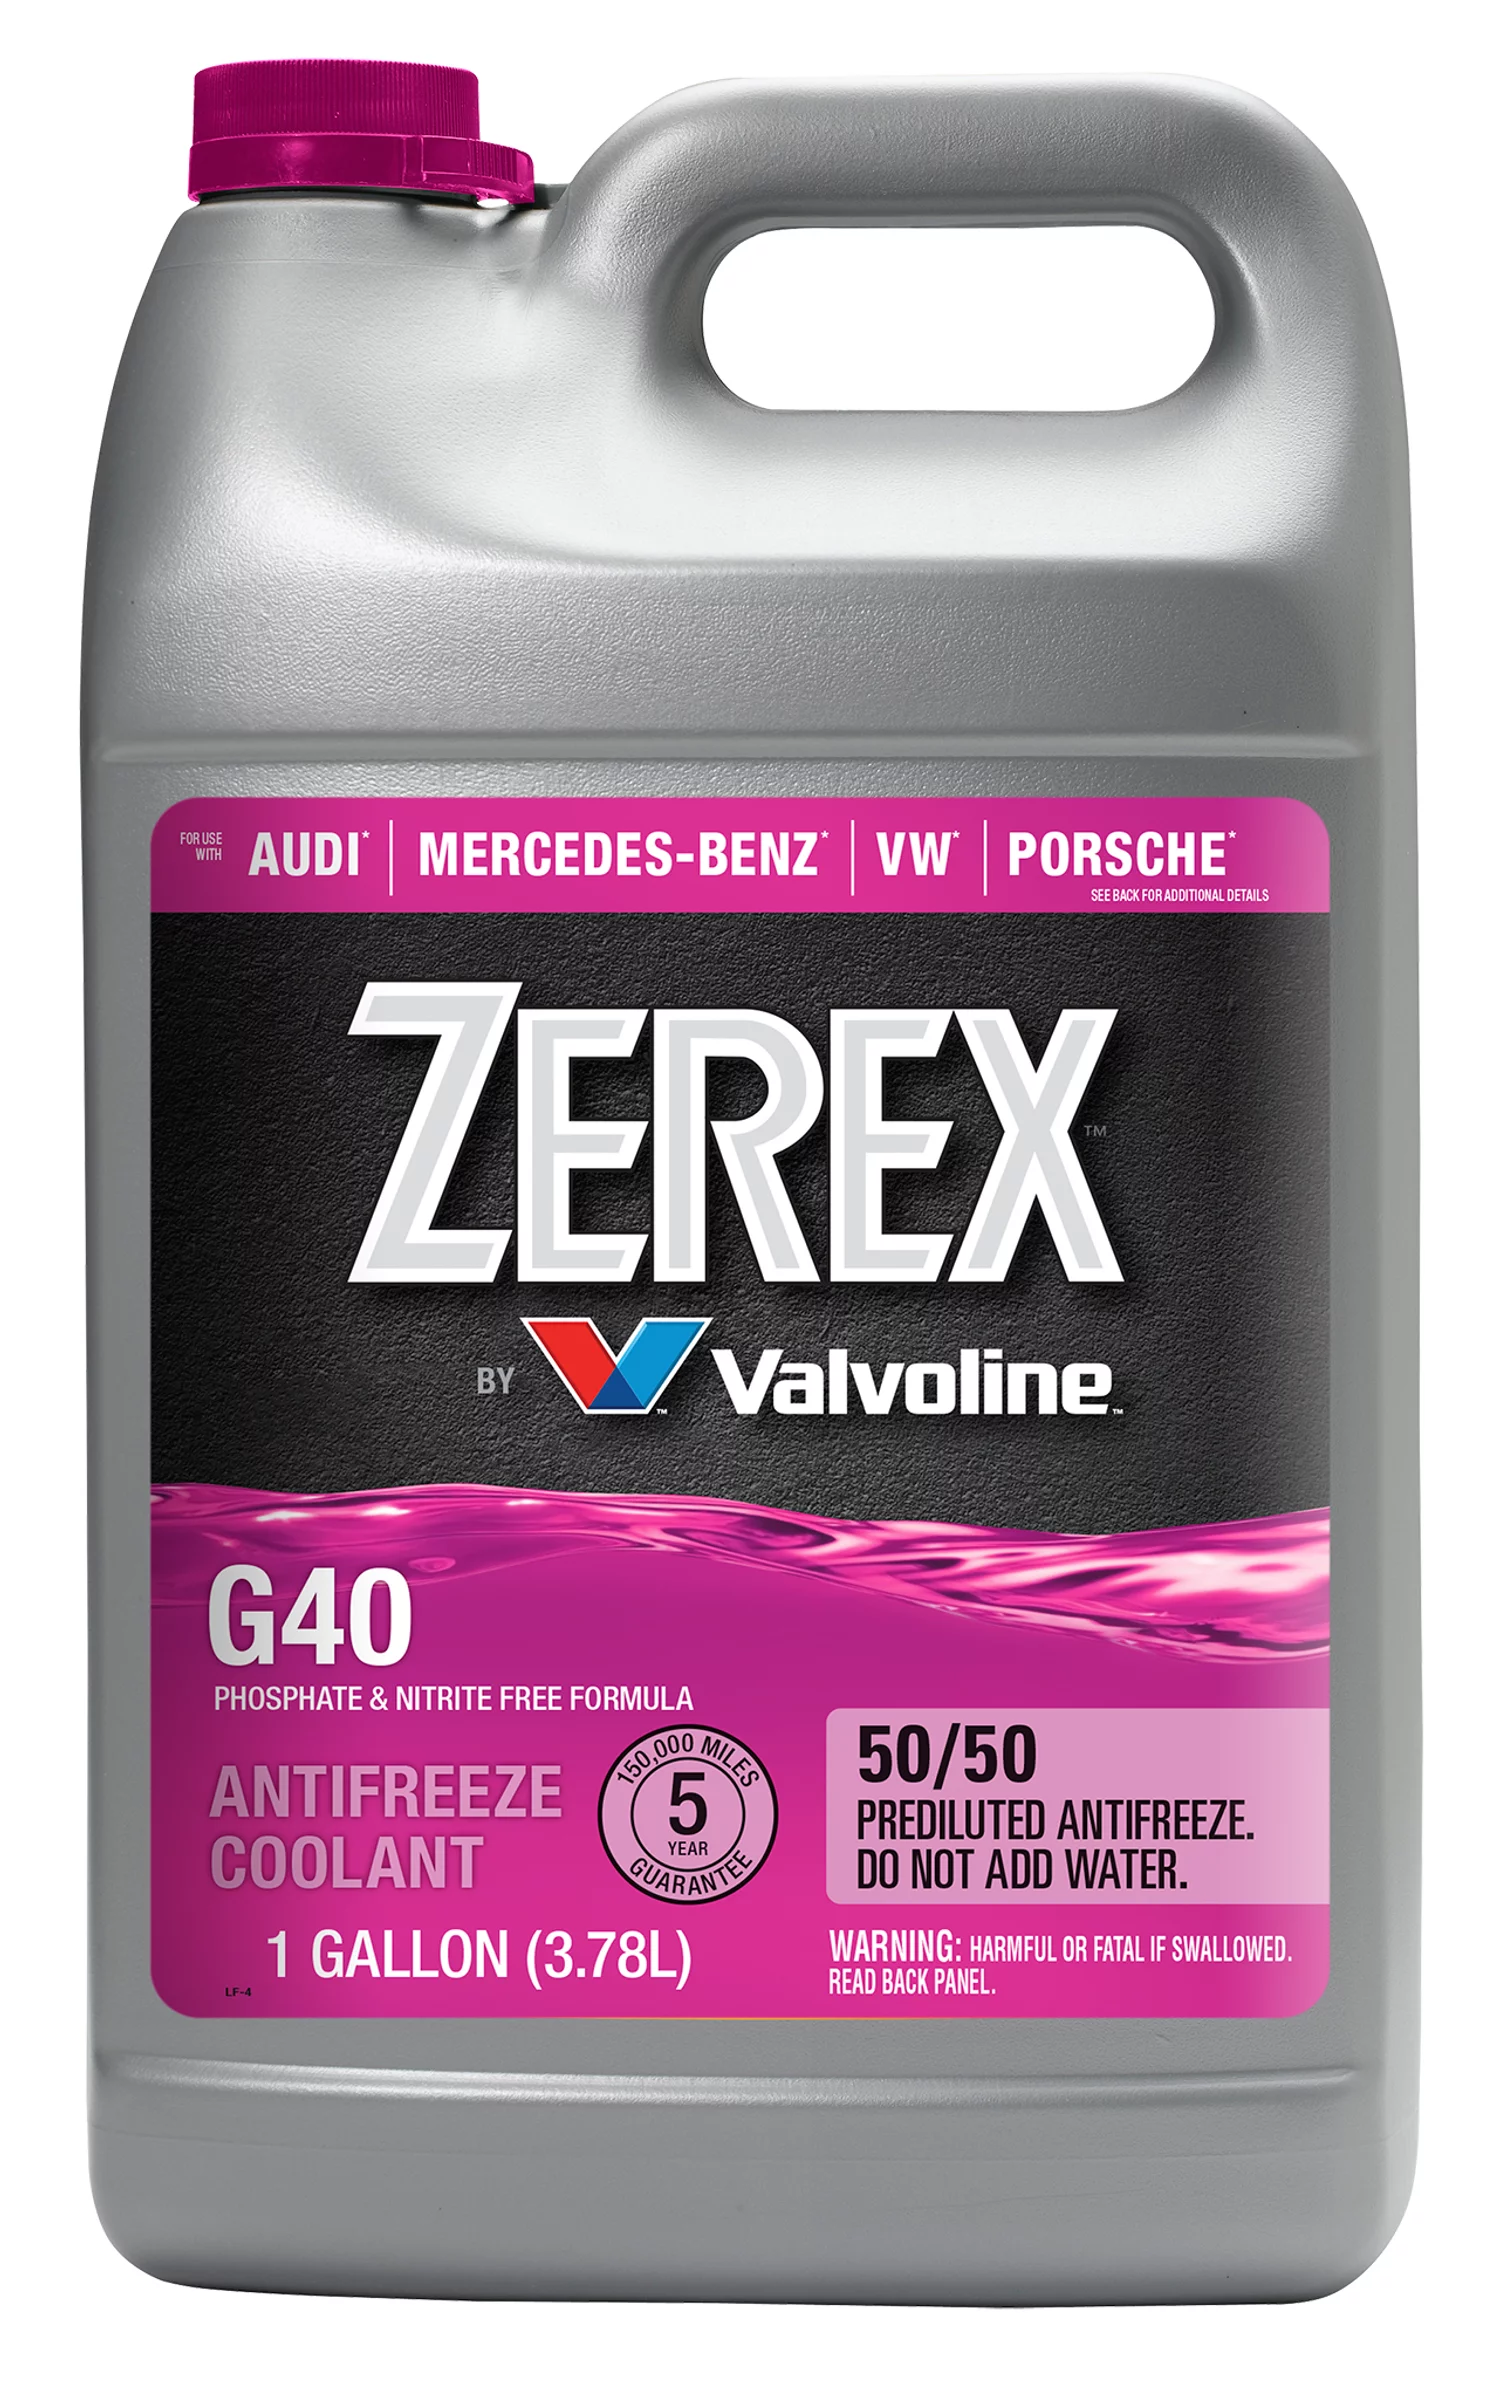 Zerex G40 Phosphate and Nitrite Free Antifreeze/Coolant 50/50 Prediluted Ready-to-Use 1 GA